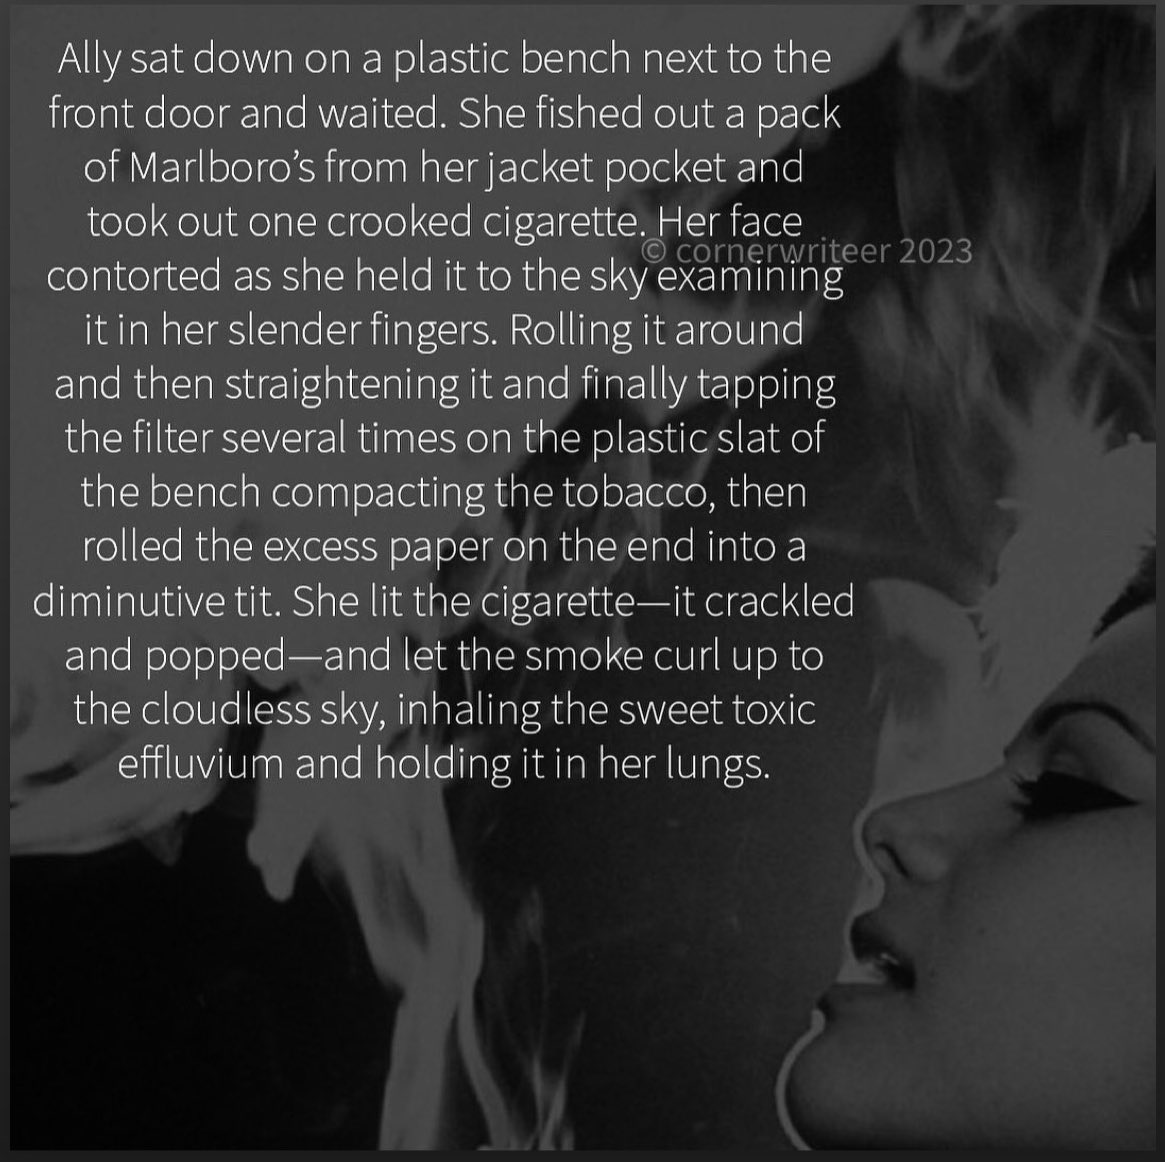 This is an excerpt from my upcoming novel, titled Ally! Exciting news - it's now available in both soft and hardcover, and we're currently formatting it for Kindle. Can't wait for you all to read it!   
#AllyNovel #BookRelease #KindleFormatting #Writers #Writerslift #Authors…